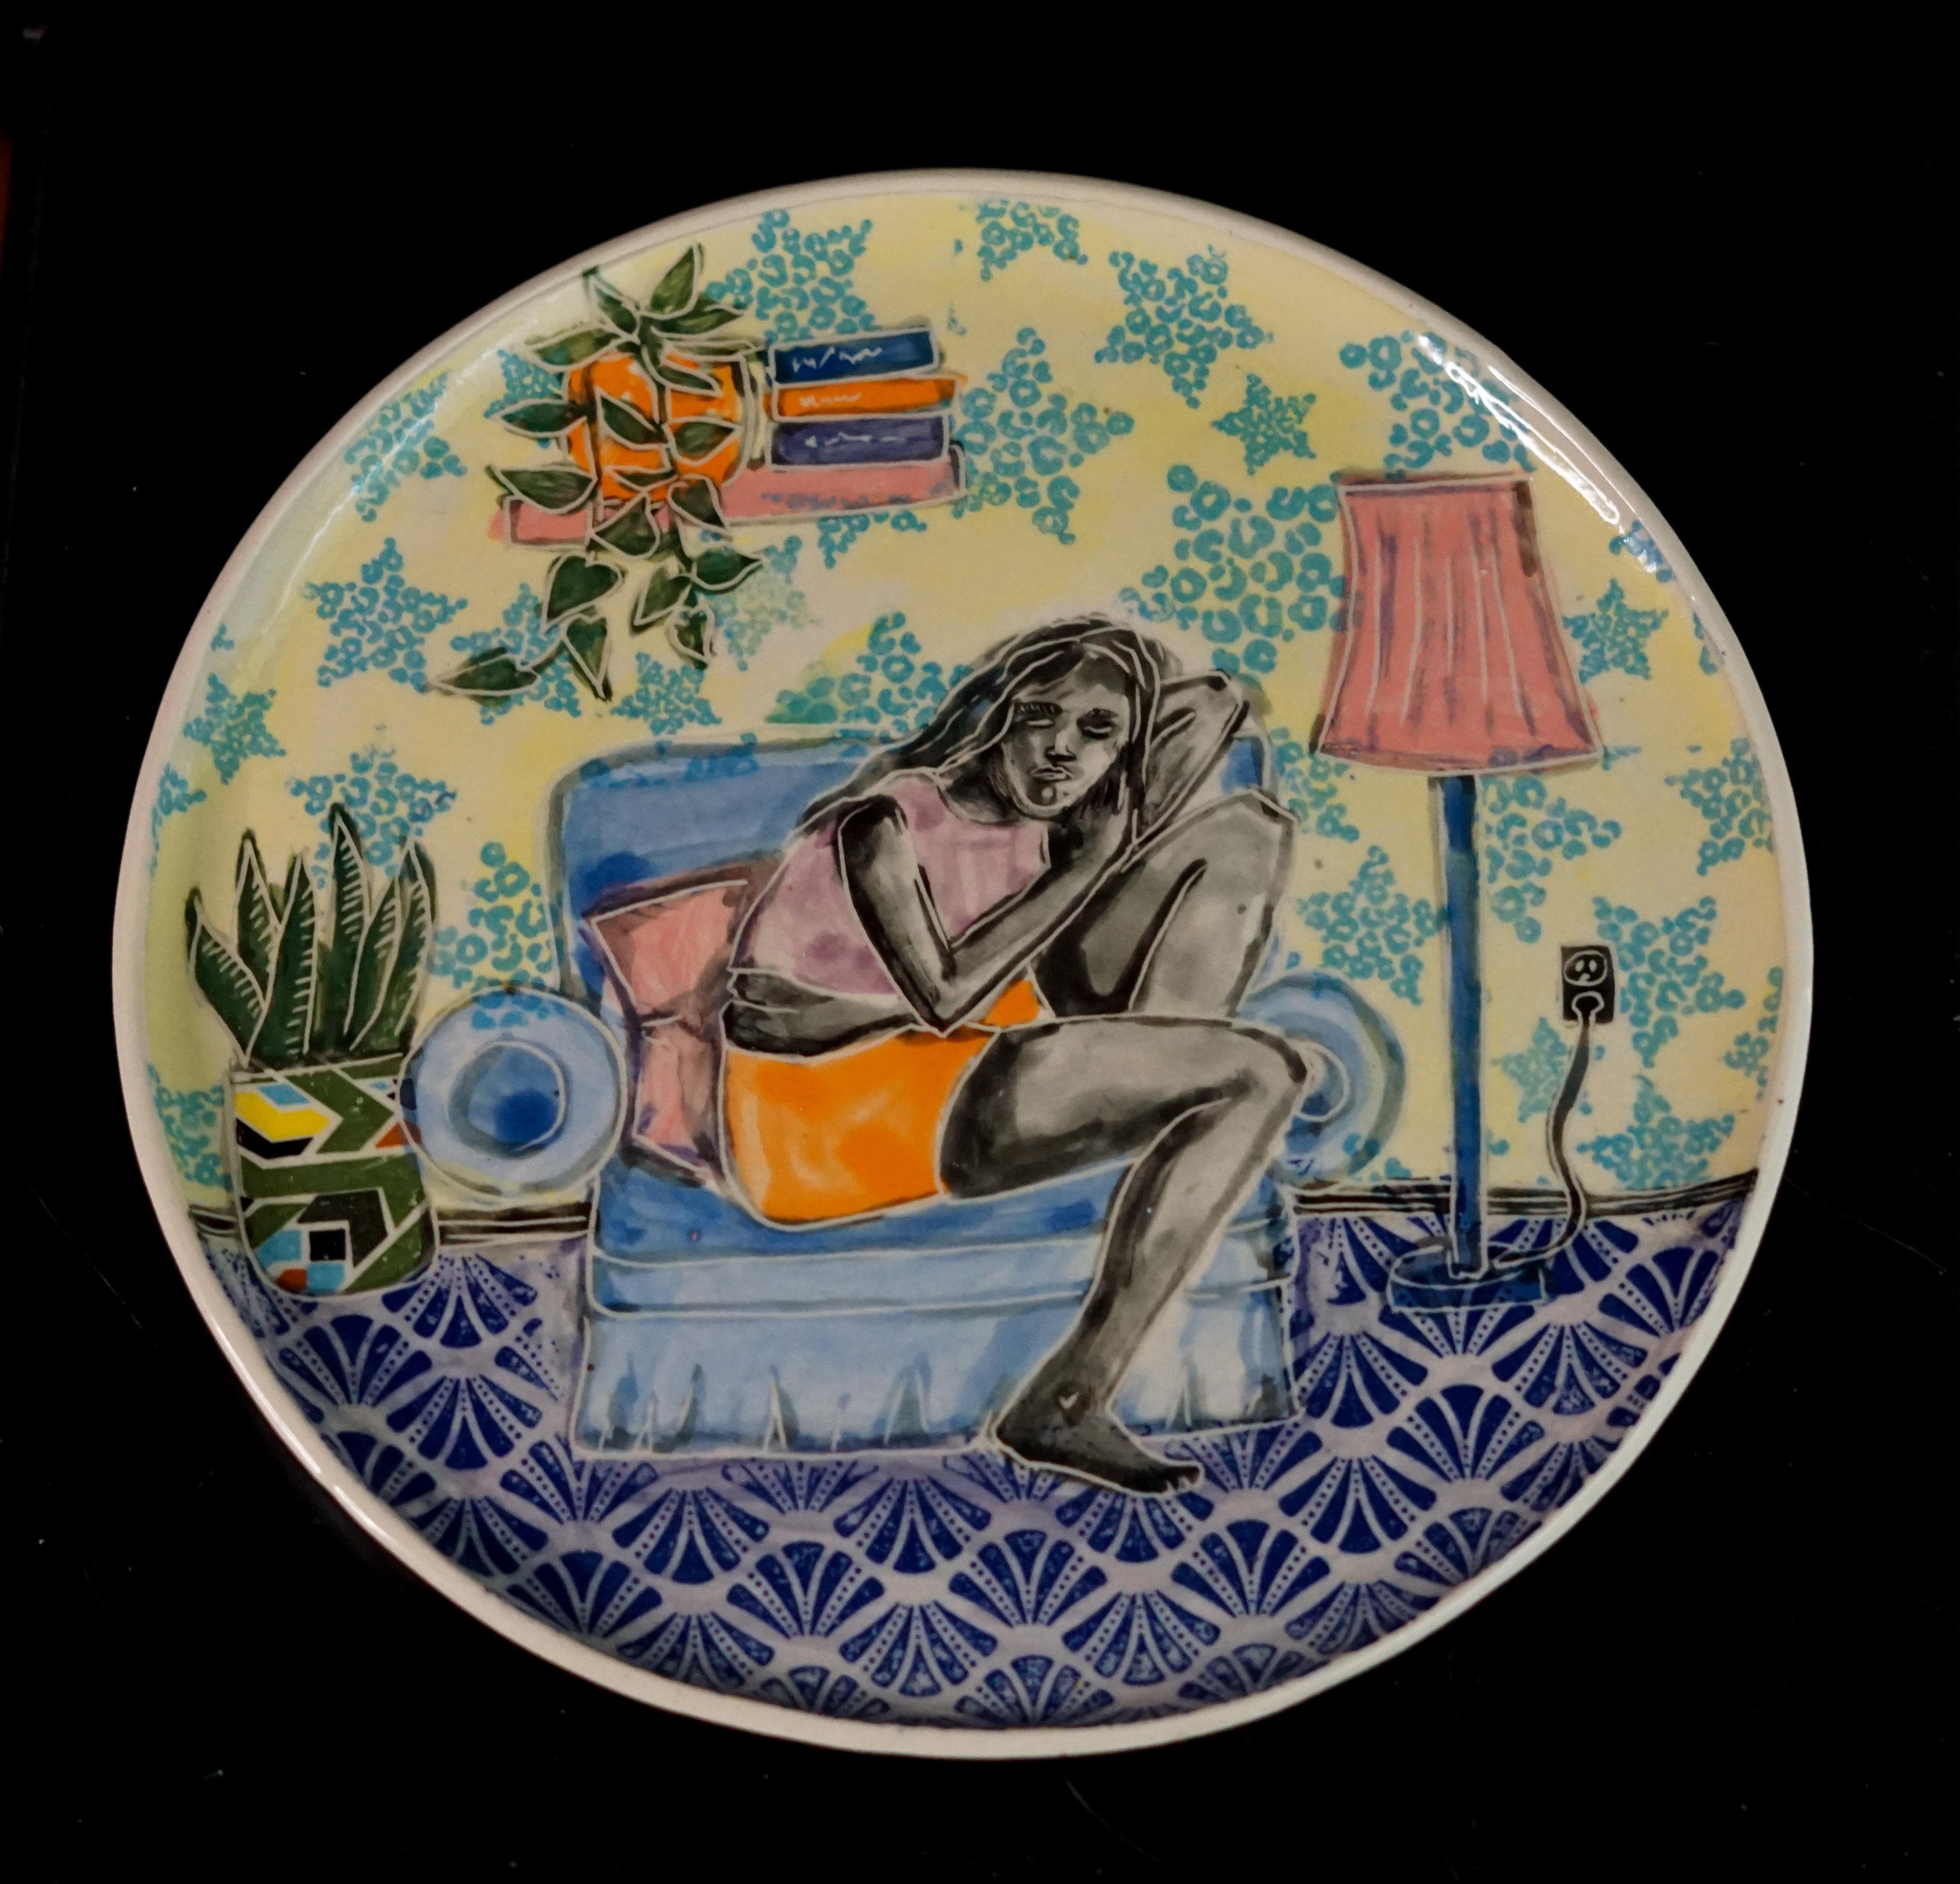 Alex Hodge Nude Sculpture - Dreaming in Technicolor, Hand built plate with sgraffito and collaged transfer